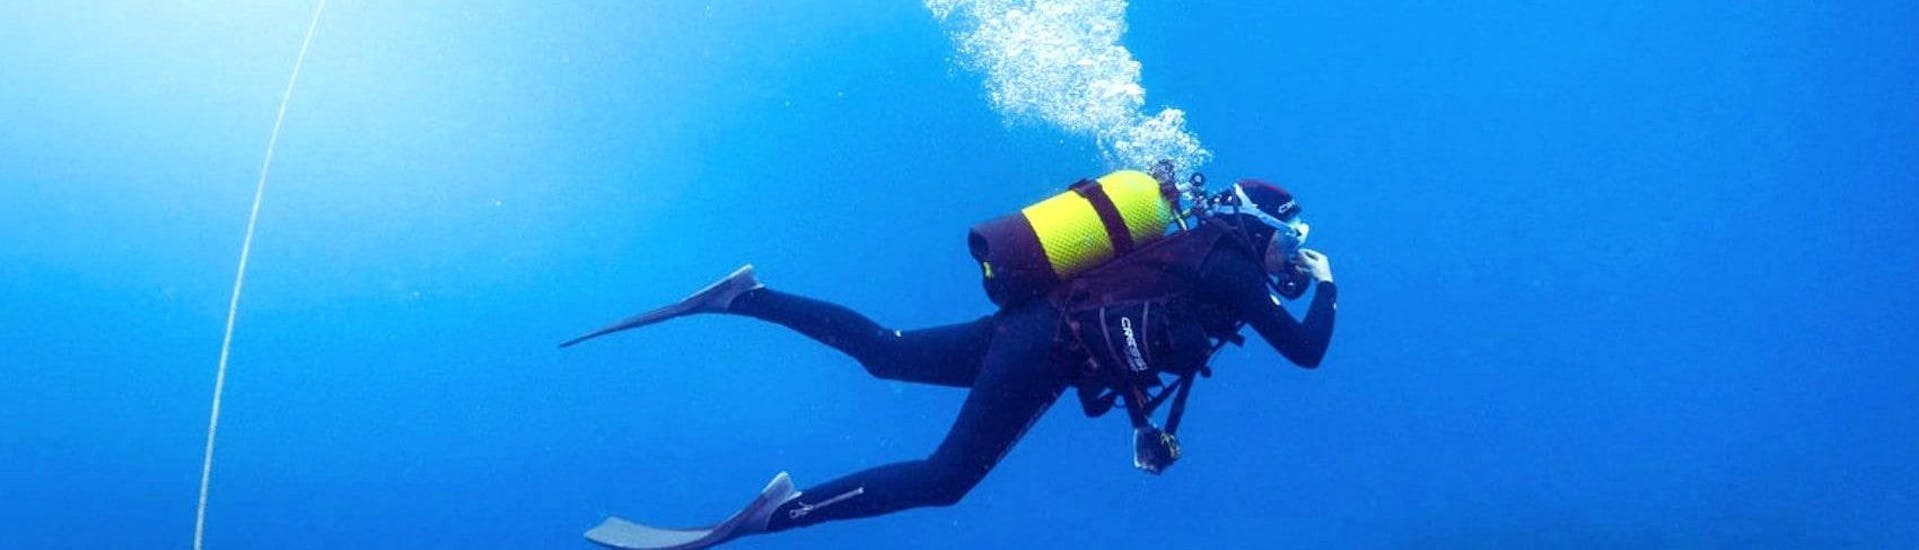 A diver is diving in complete autonomy thanks to their SSI Scuba Diver Course at Cap d'Antibes for Beginners with BeFree2Dive.